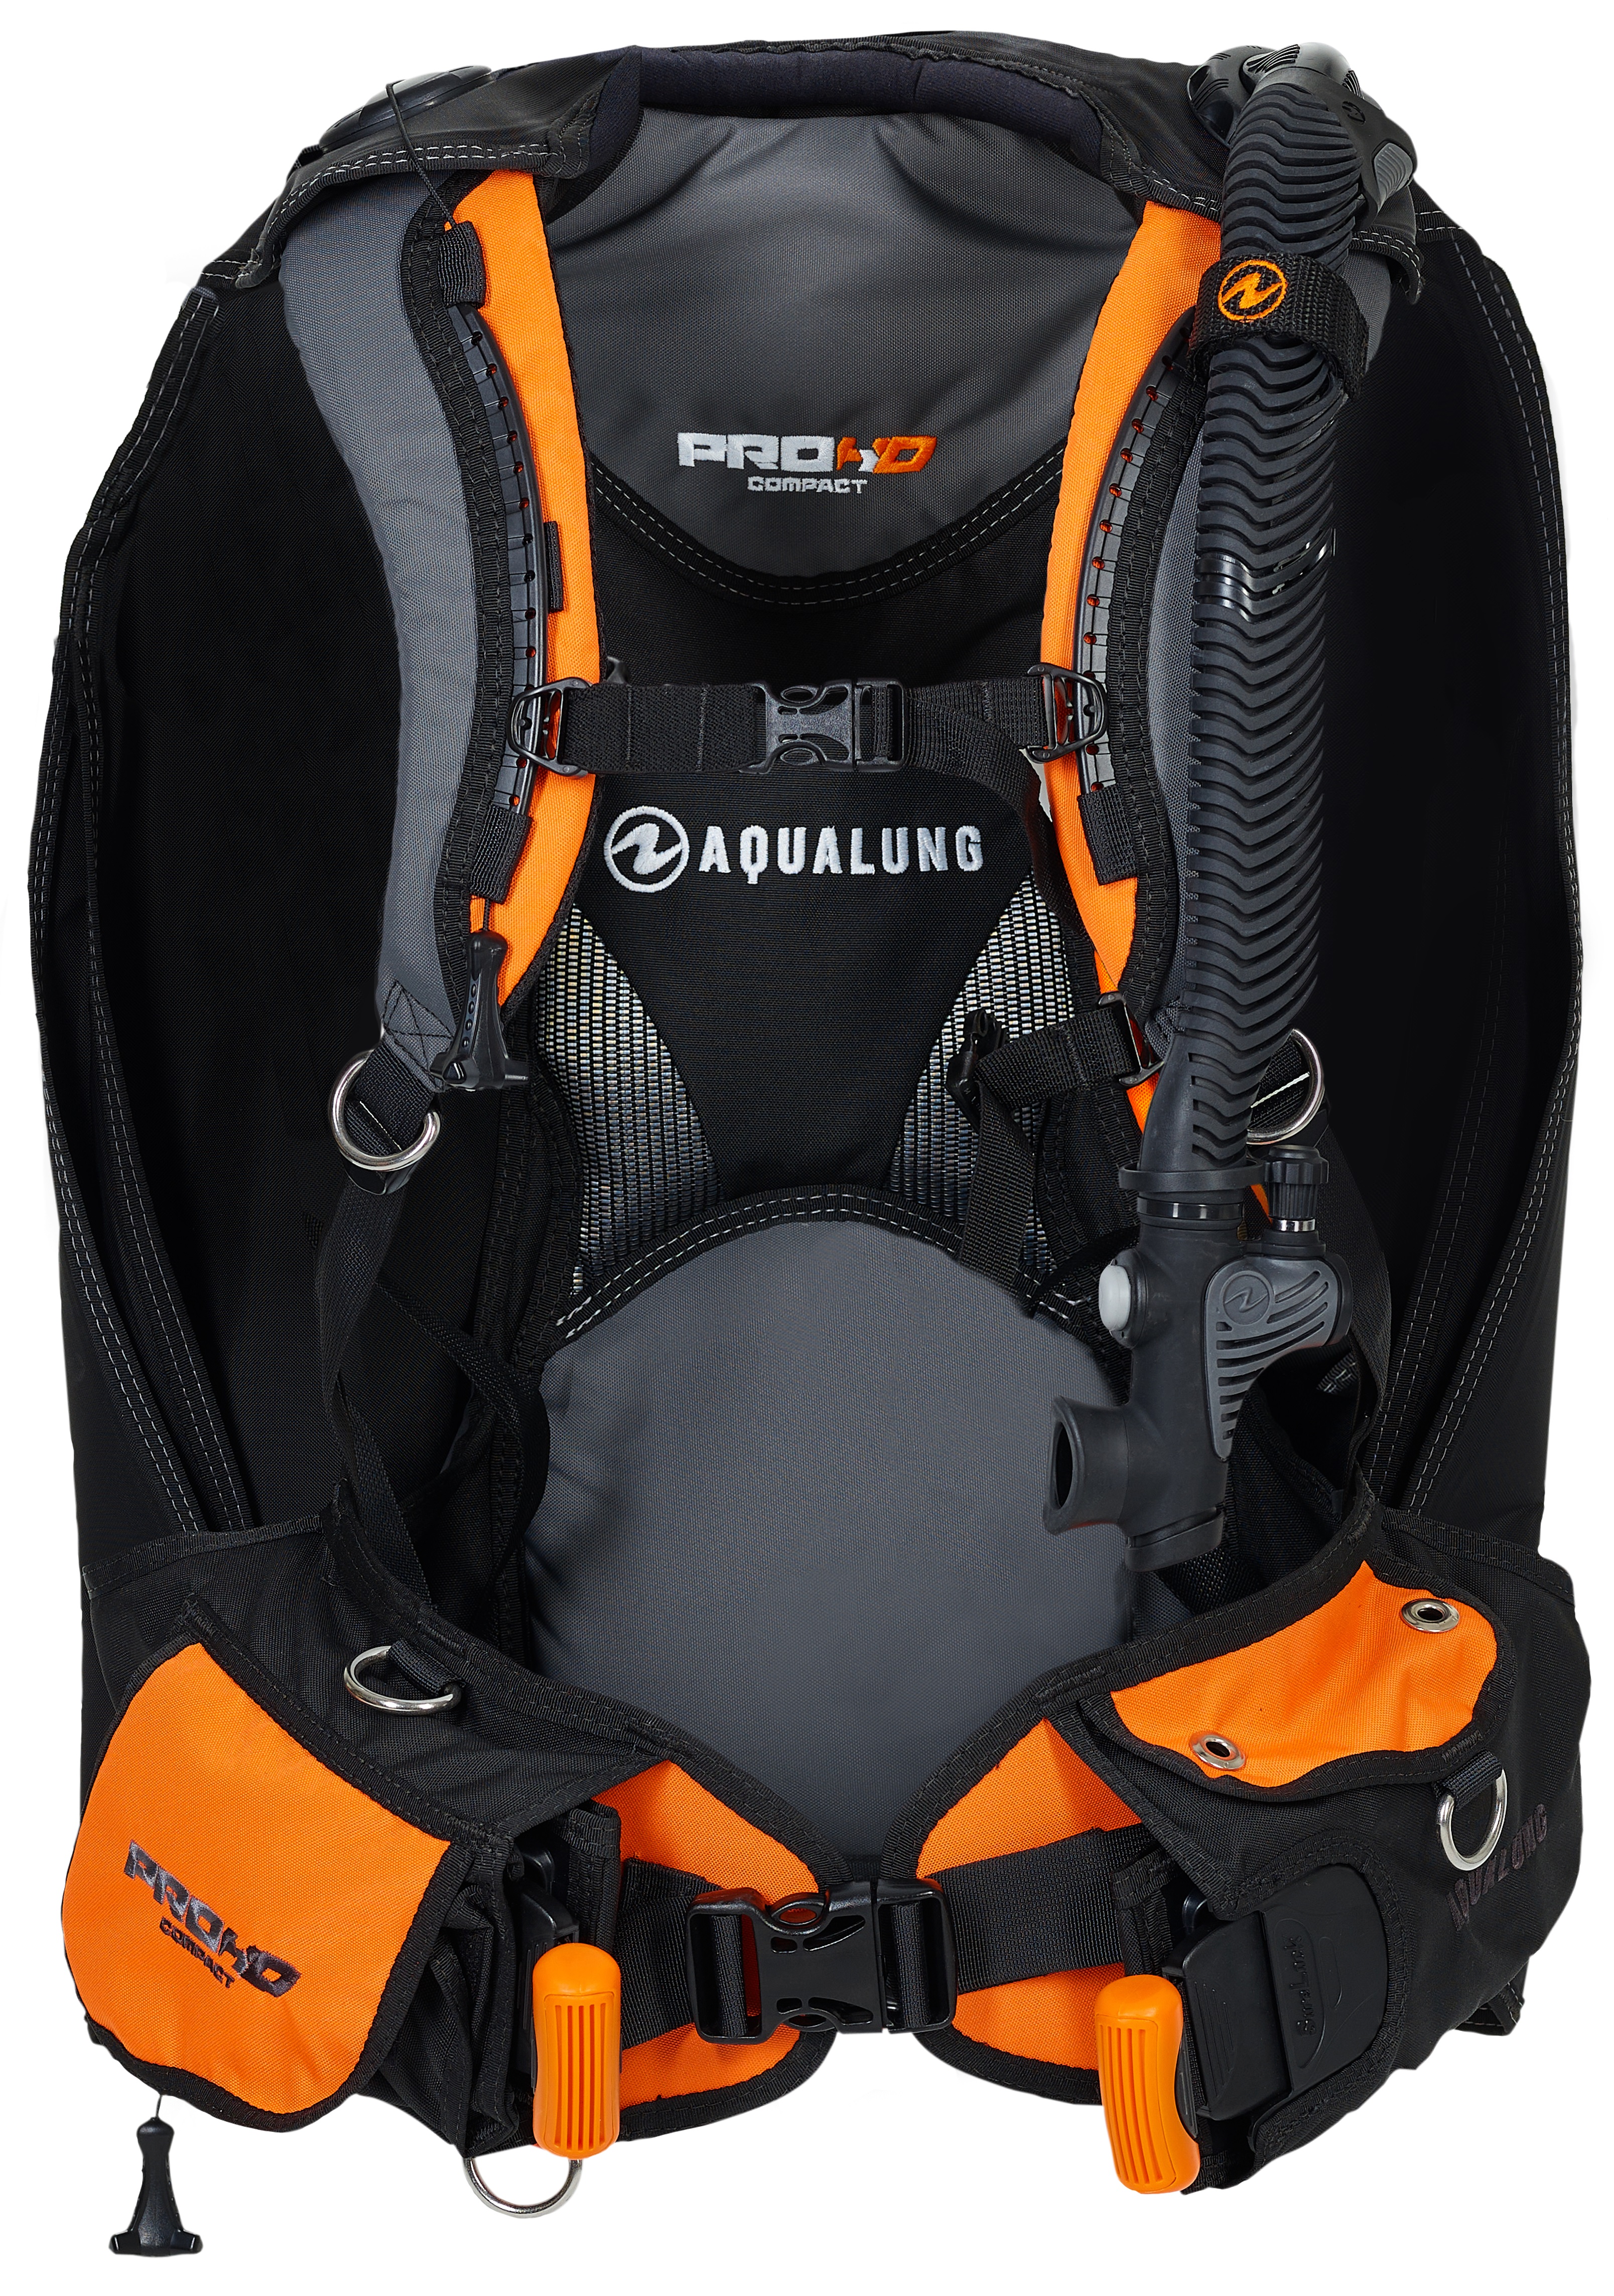 Aqualung PRO HD COMPACT Taucherjacket Tarierweste Collection 2022